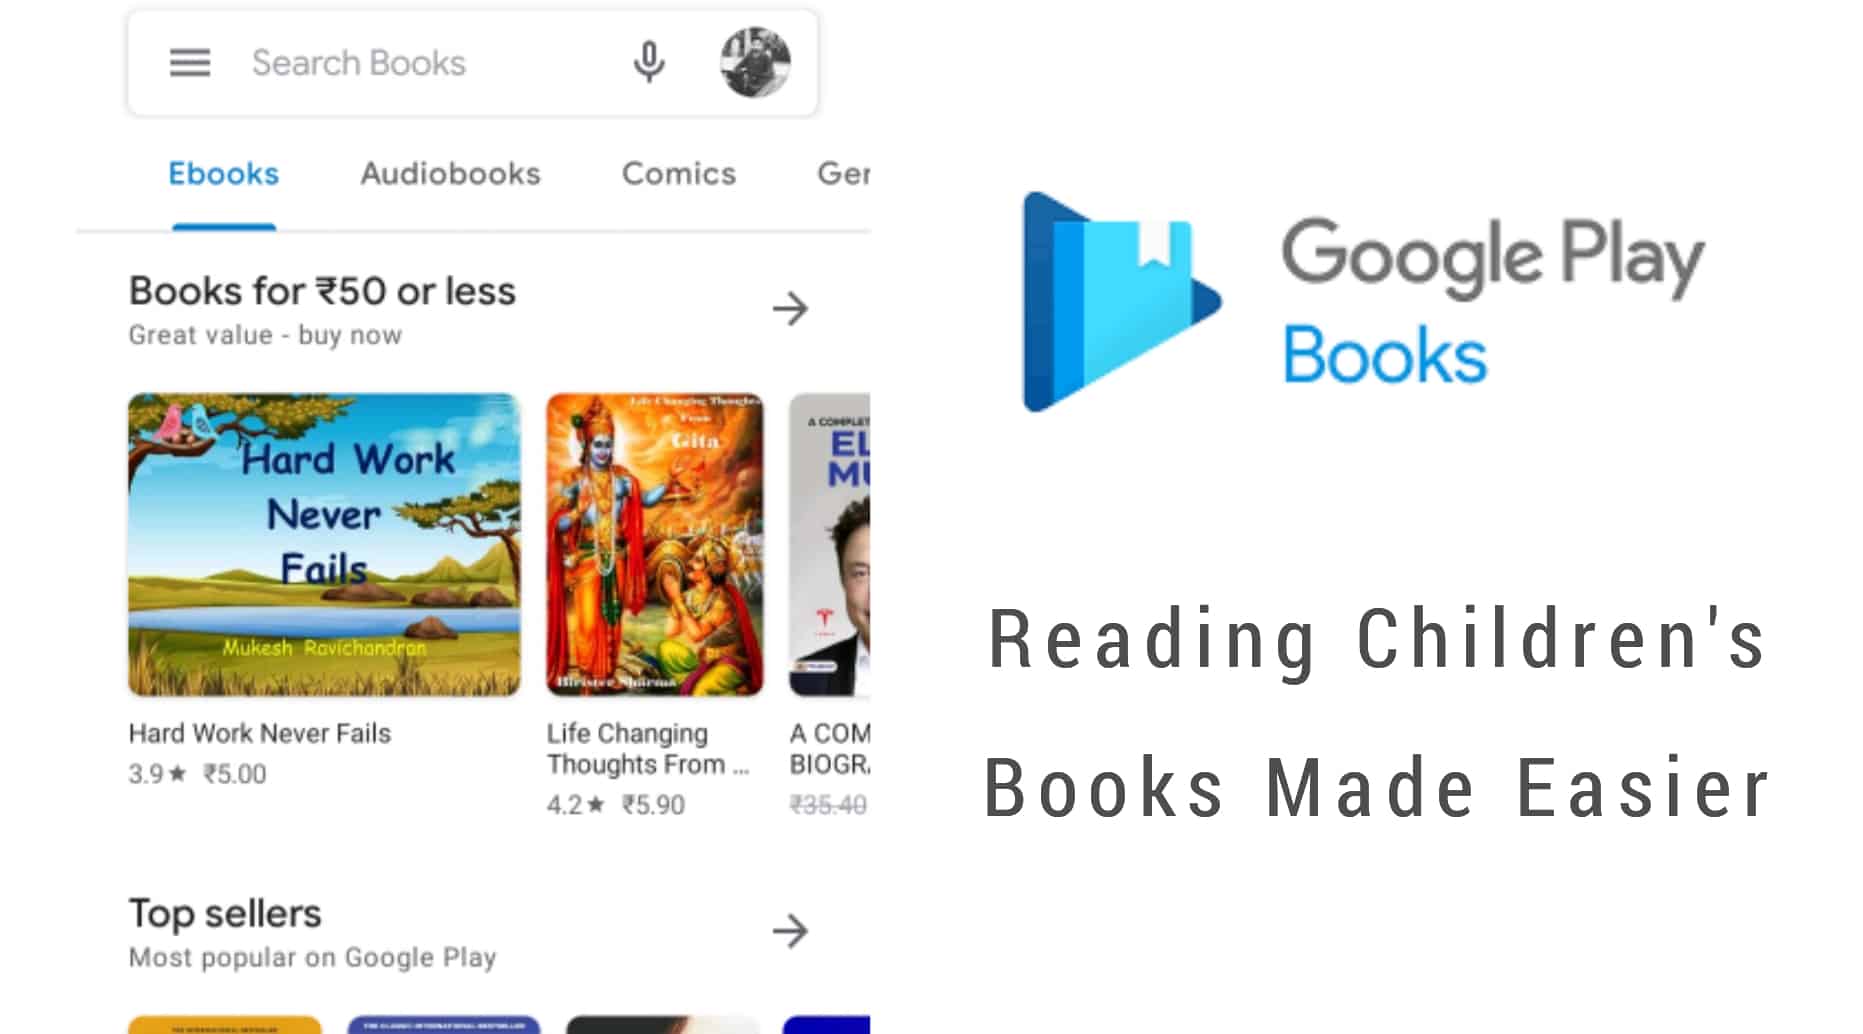 Google Play Books Makes Reading Children's Books Easier: Adds New Tools, Features